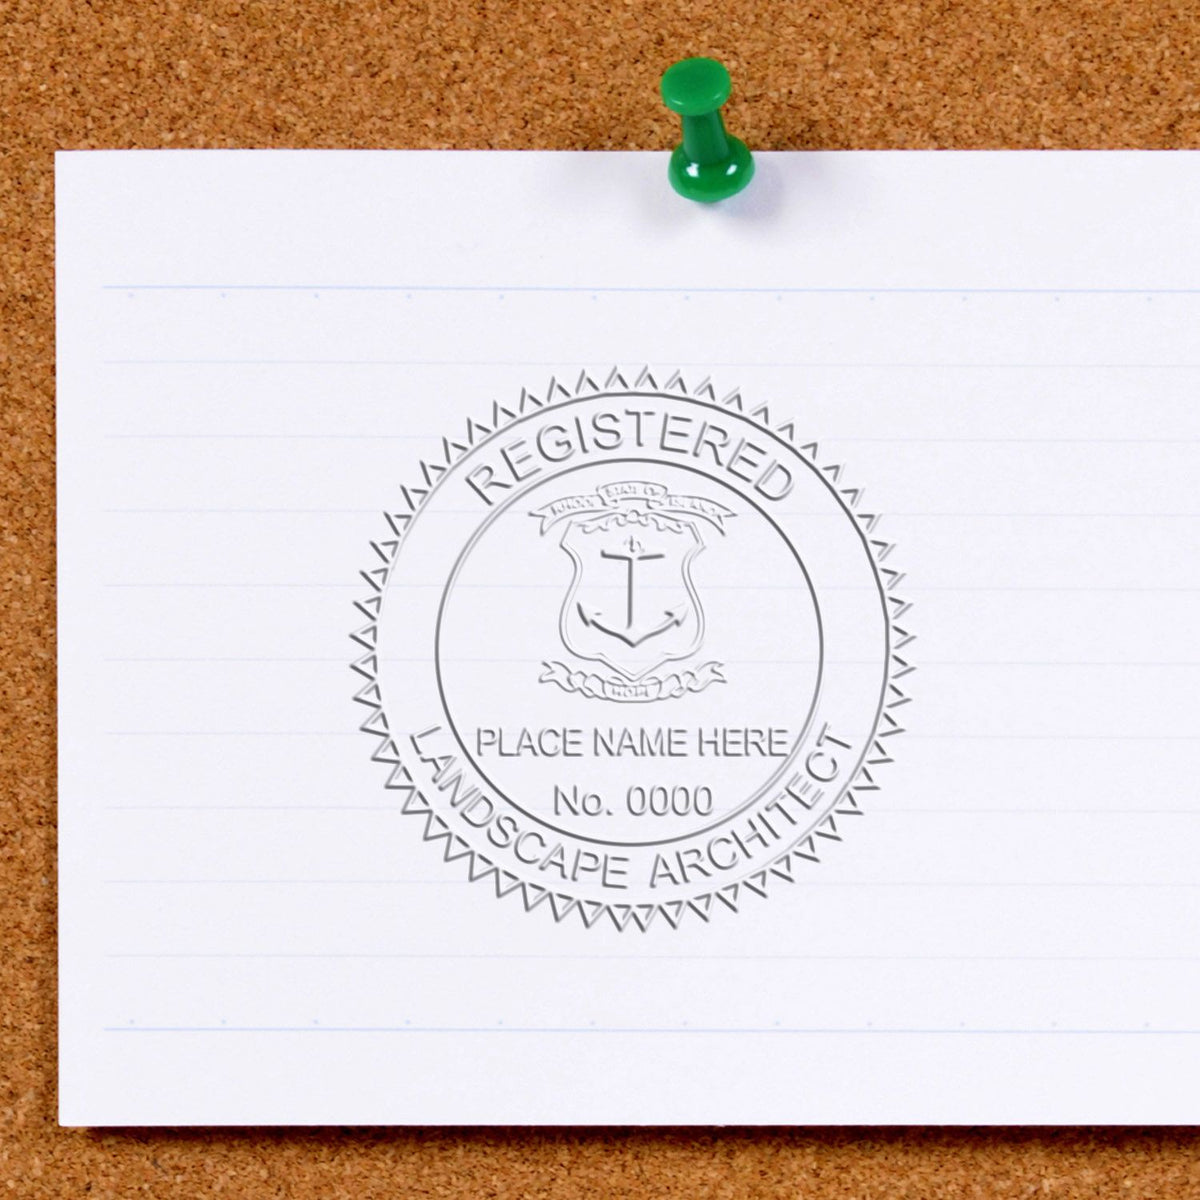 Another Example of a stamped impression of the Hybrid Rhode Island Landscape Architect Seal on a office form